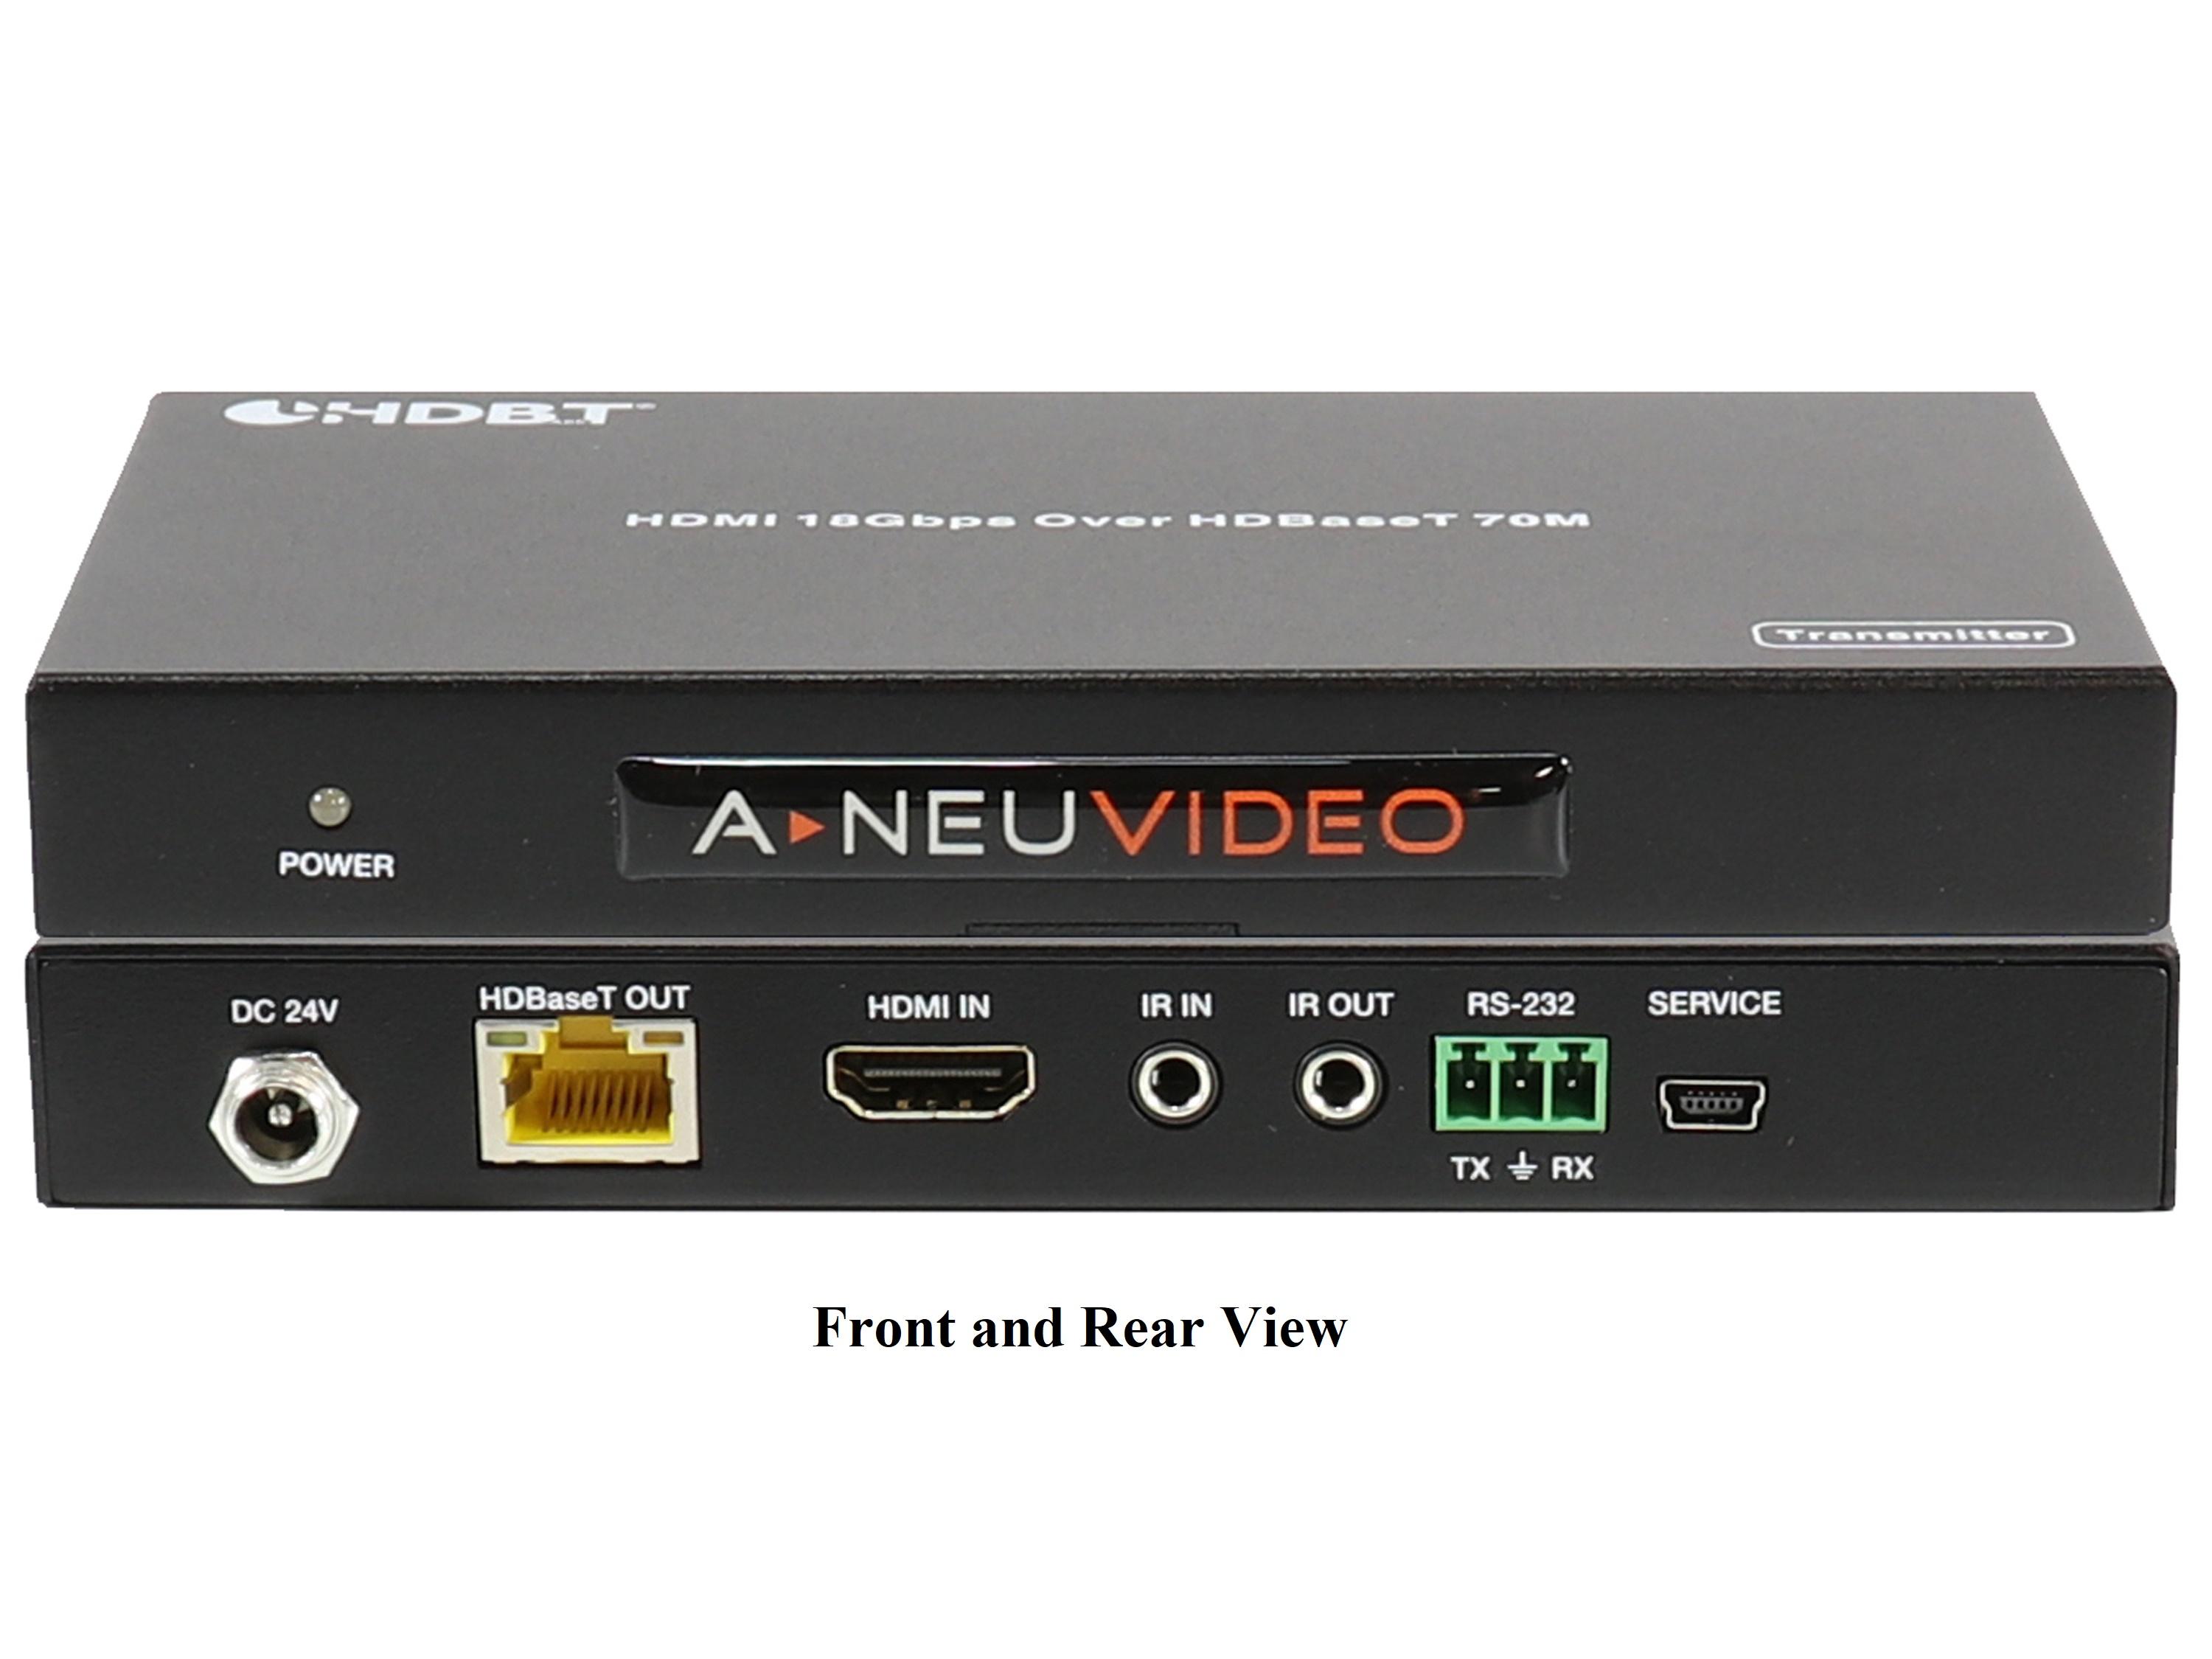 ANI-HDR-70 HDMI 4K HDR 18Gbps PoH Extender (Transmitter/Receiver) Kit over Cat5e/6  (230ft/70m) by A-NeuVideo